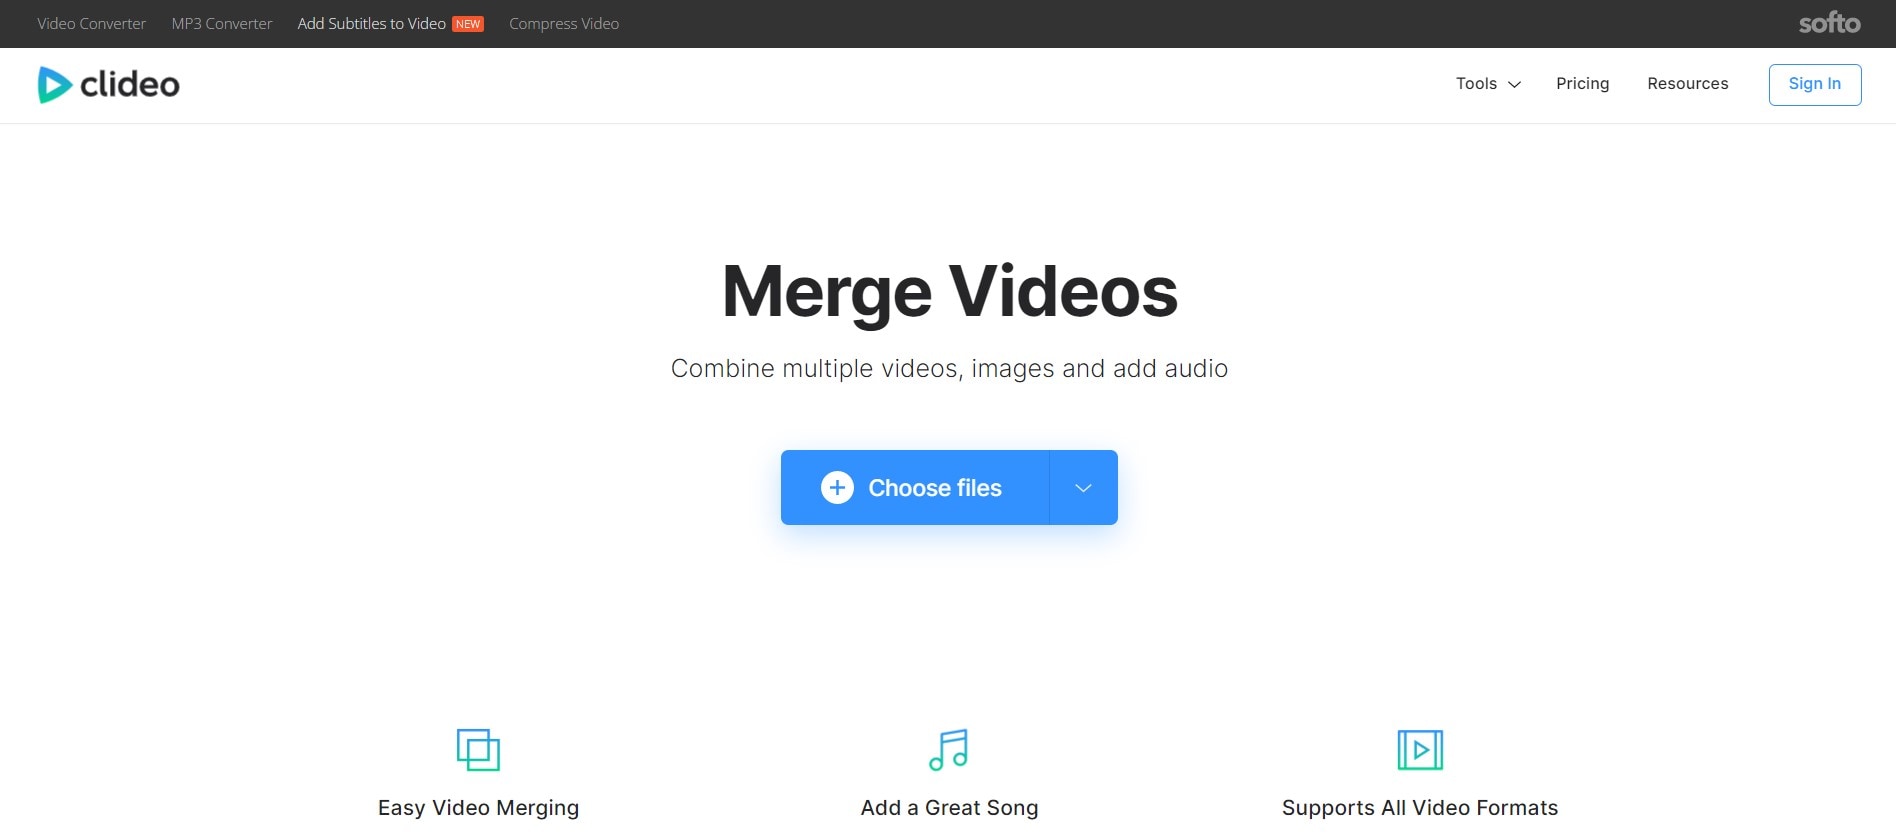 video-mergers-without-watermark.html